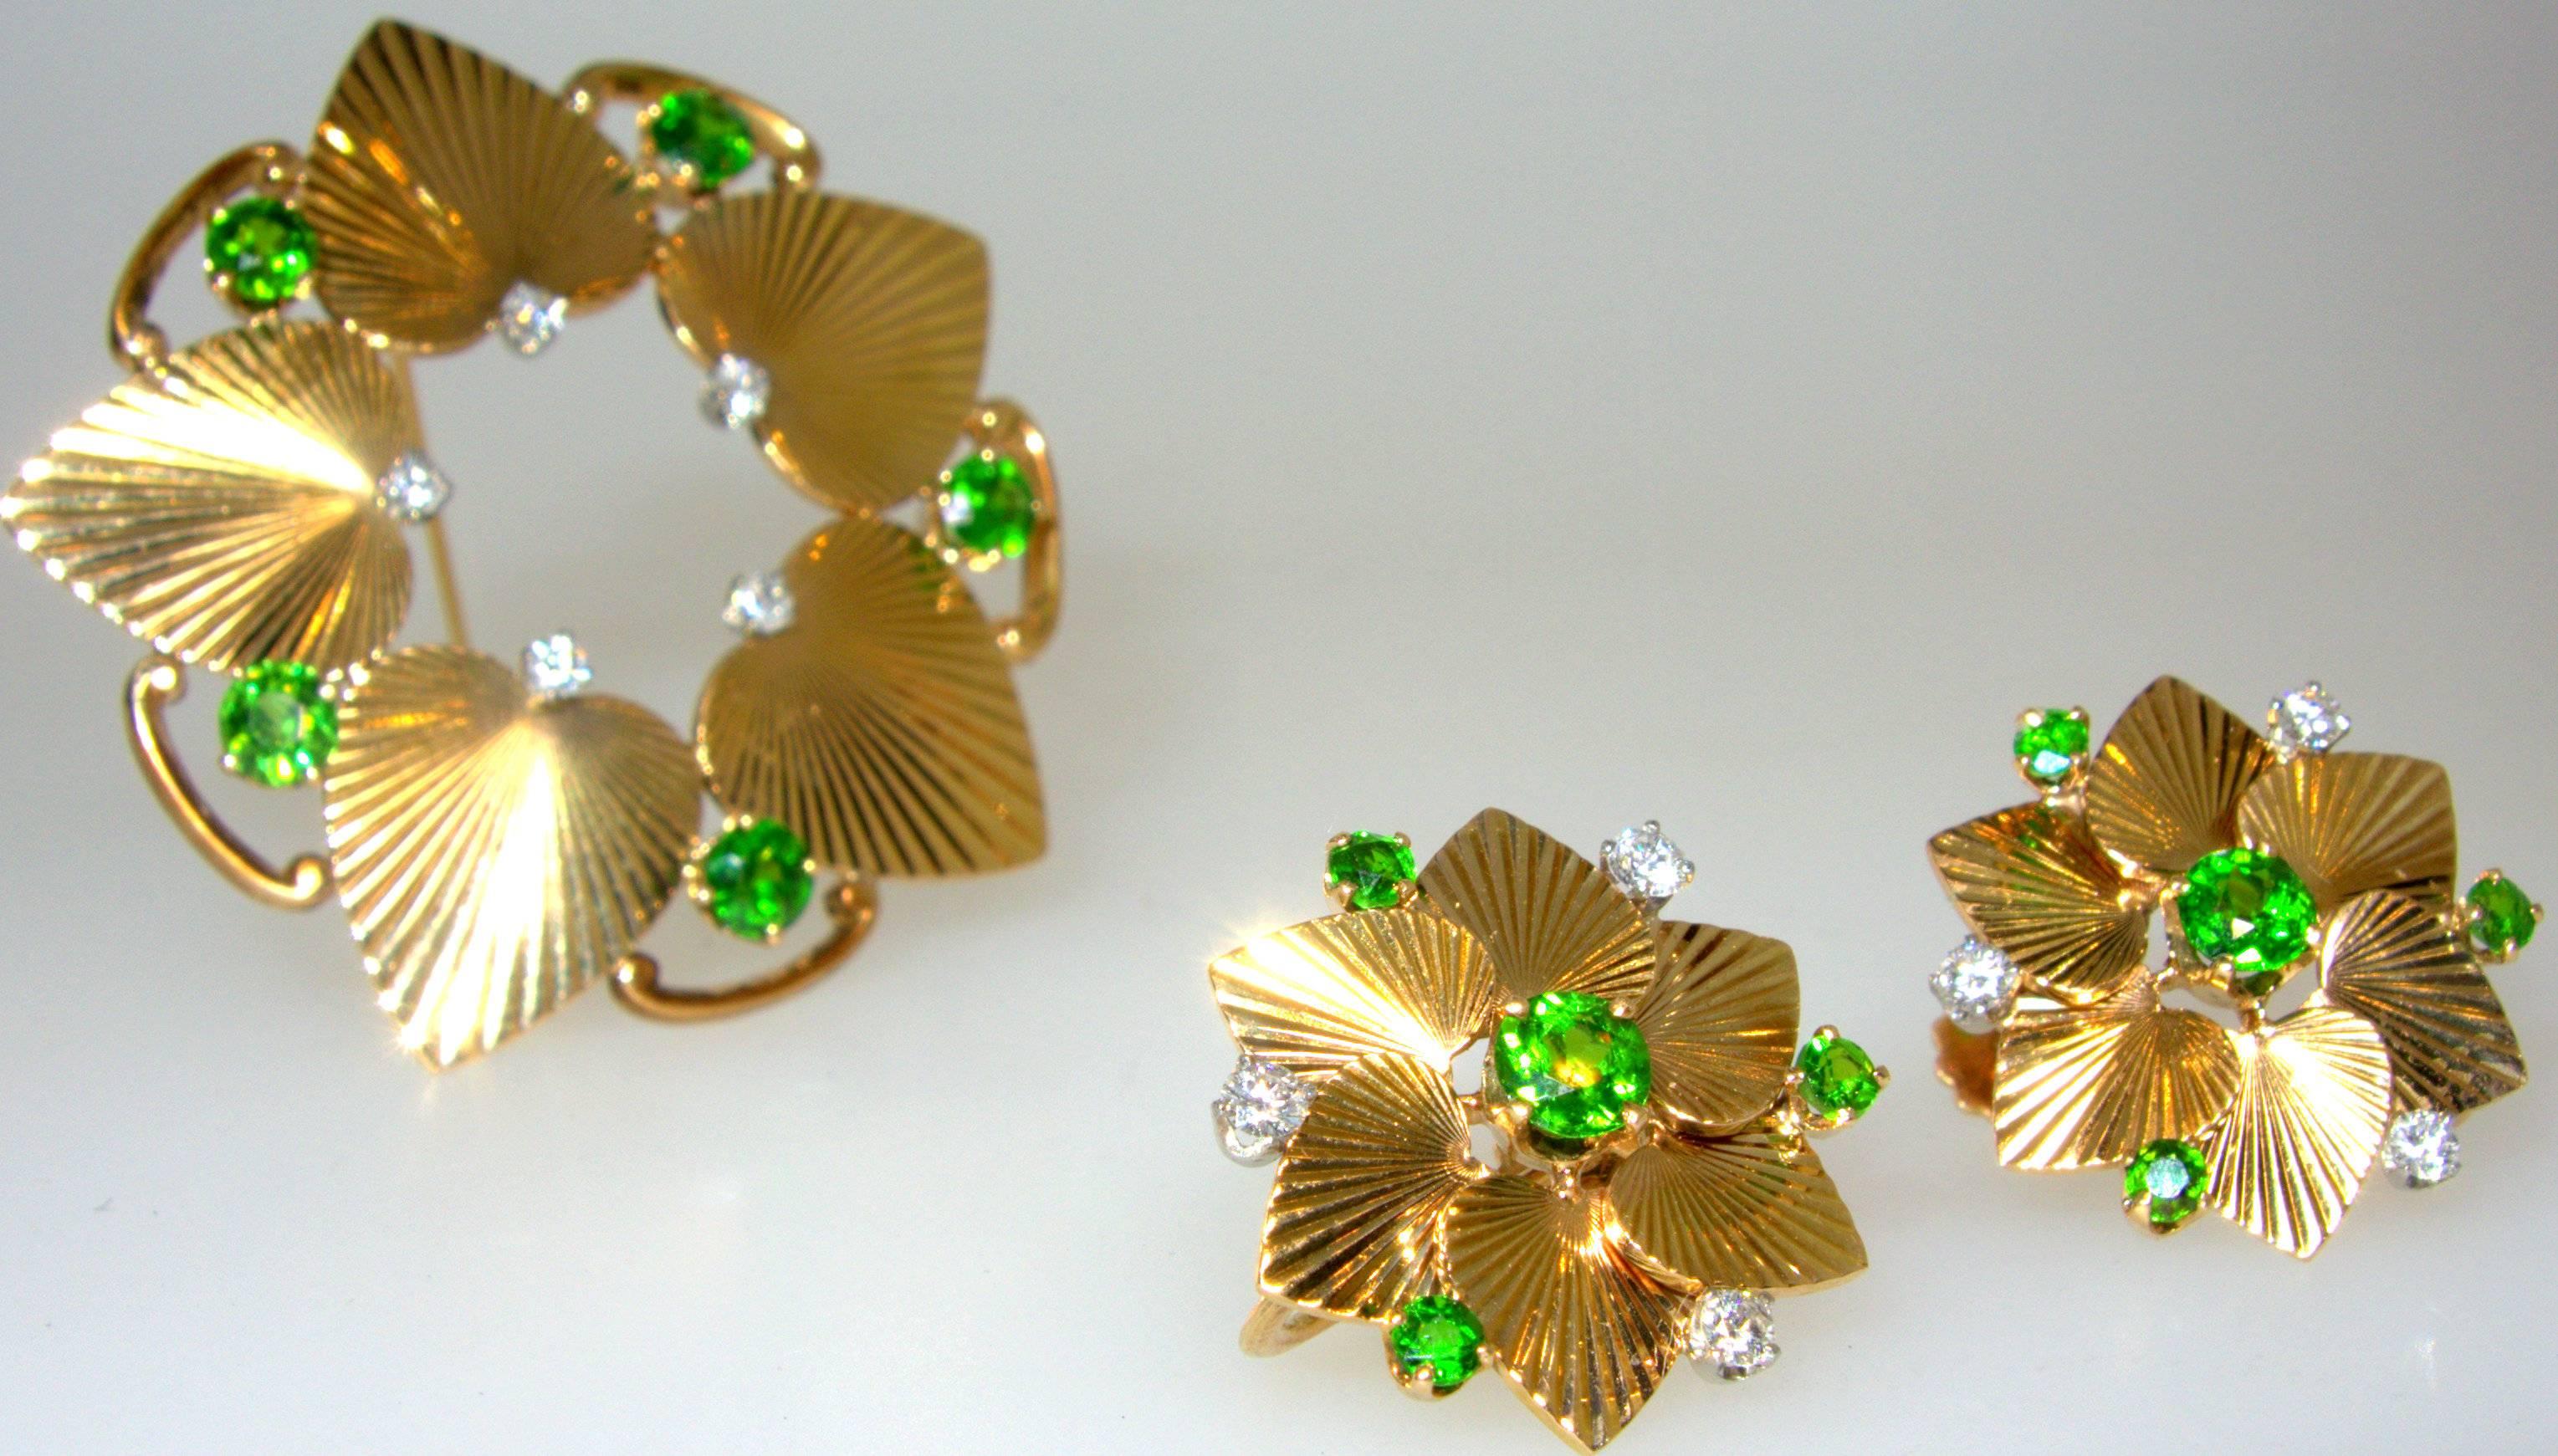 Fine bright Demantoid garnets are accented by white diamonds.  The earrings and brooch are by the famous house of Tiffany & Co.  Retro in design with heart shaped motifs accented with  highly unusual green garnets.